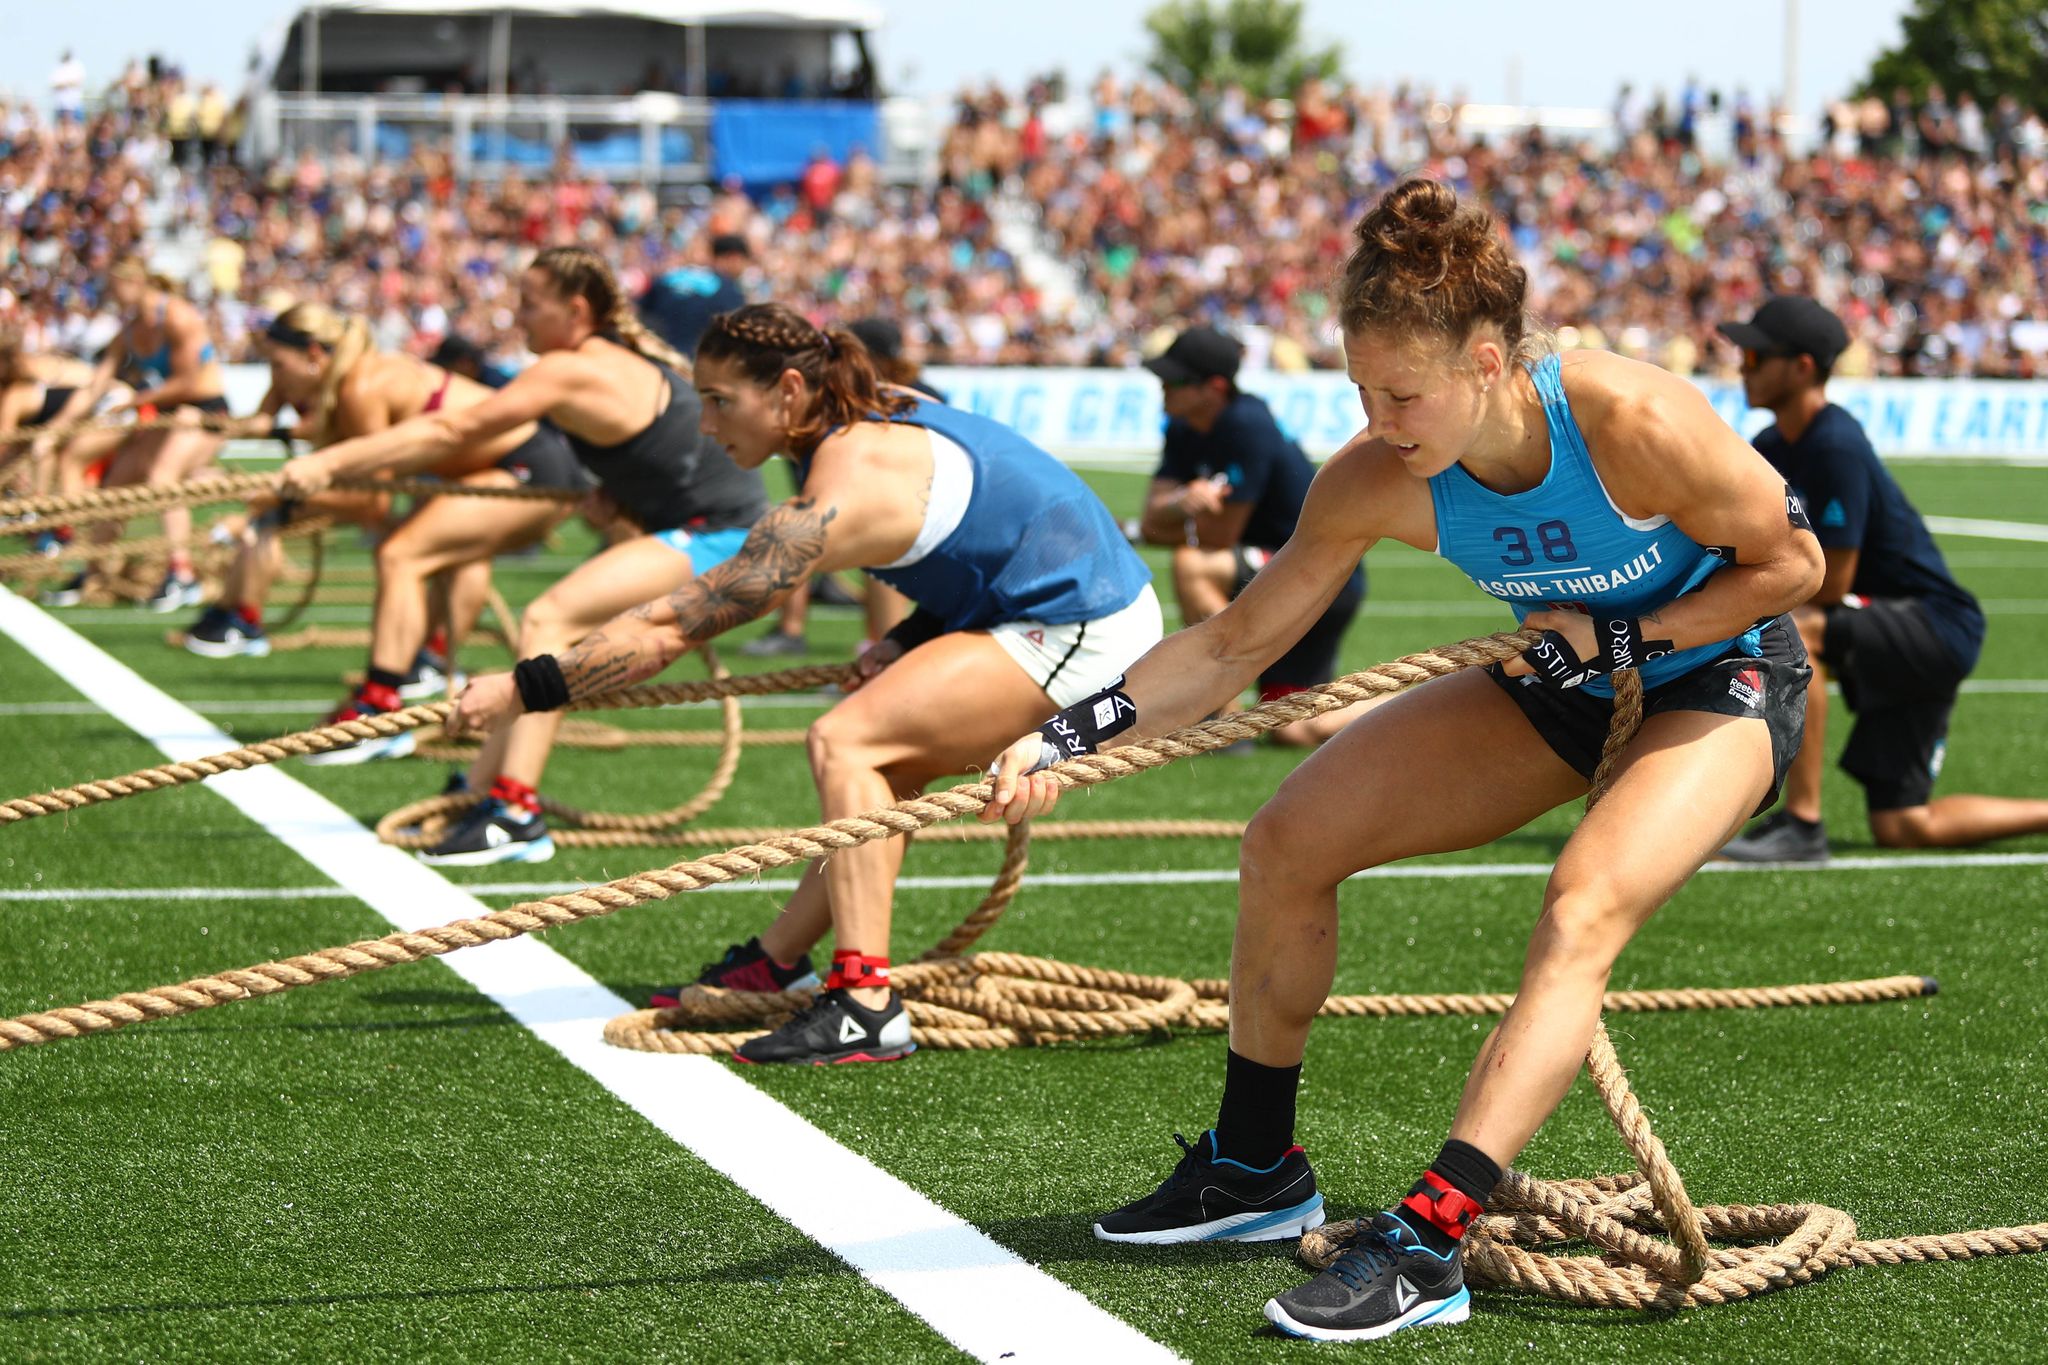 CrossFit Games 5 of the Female Watch